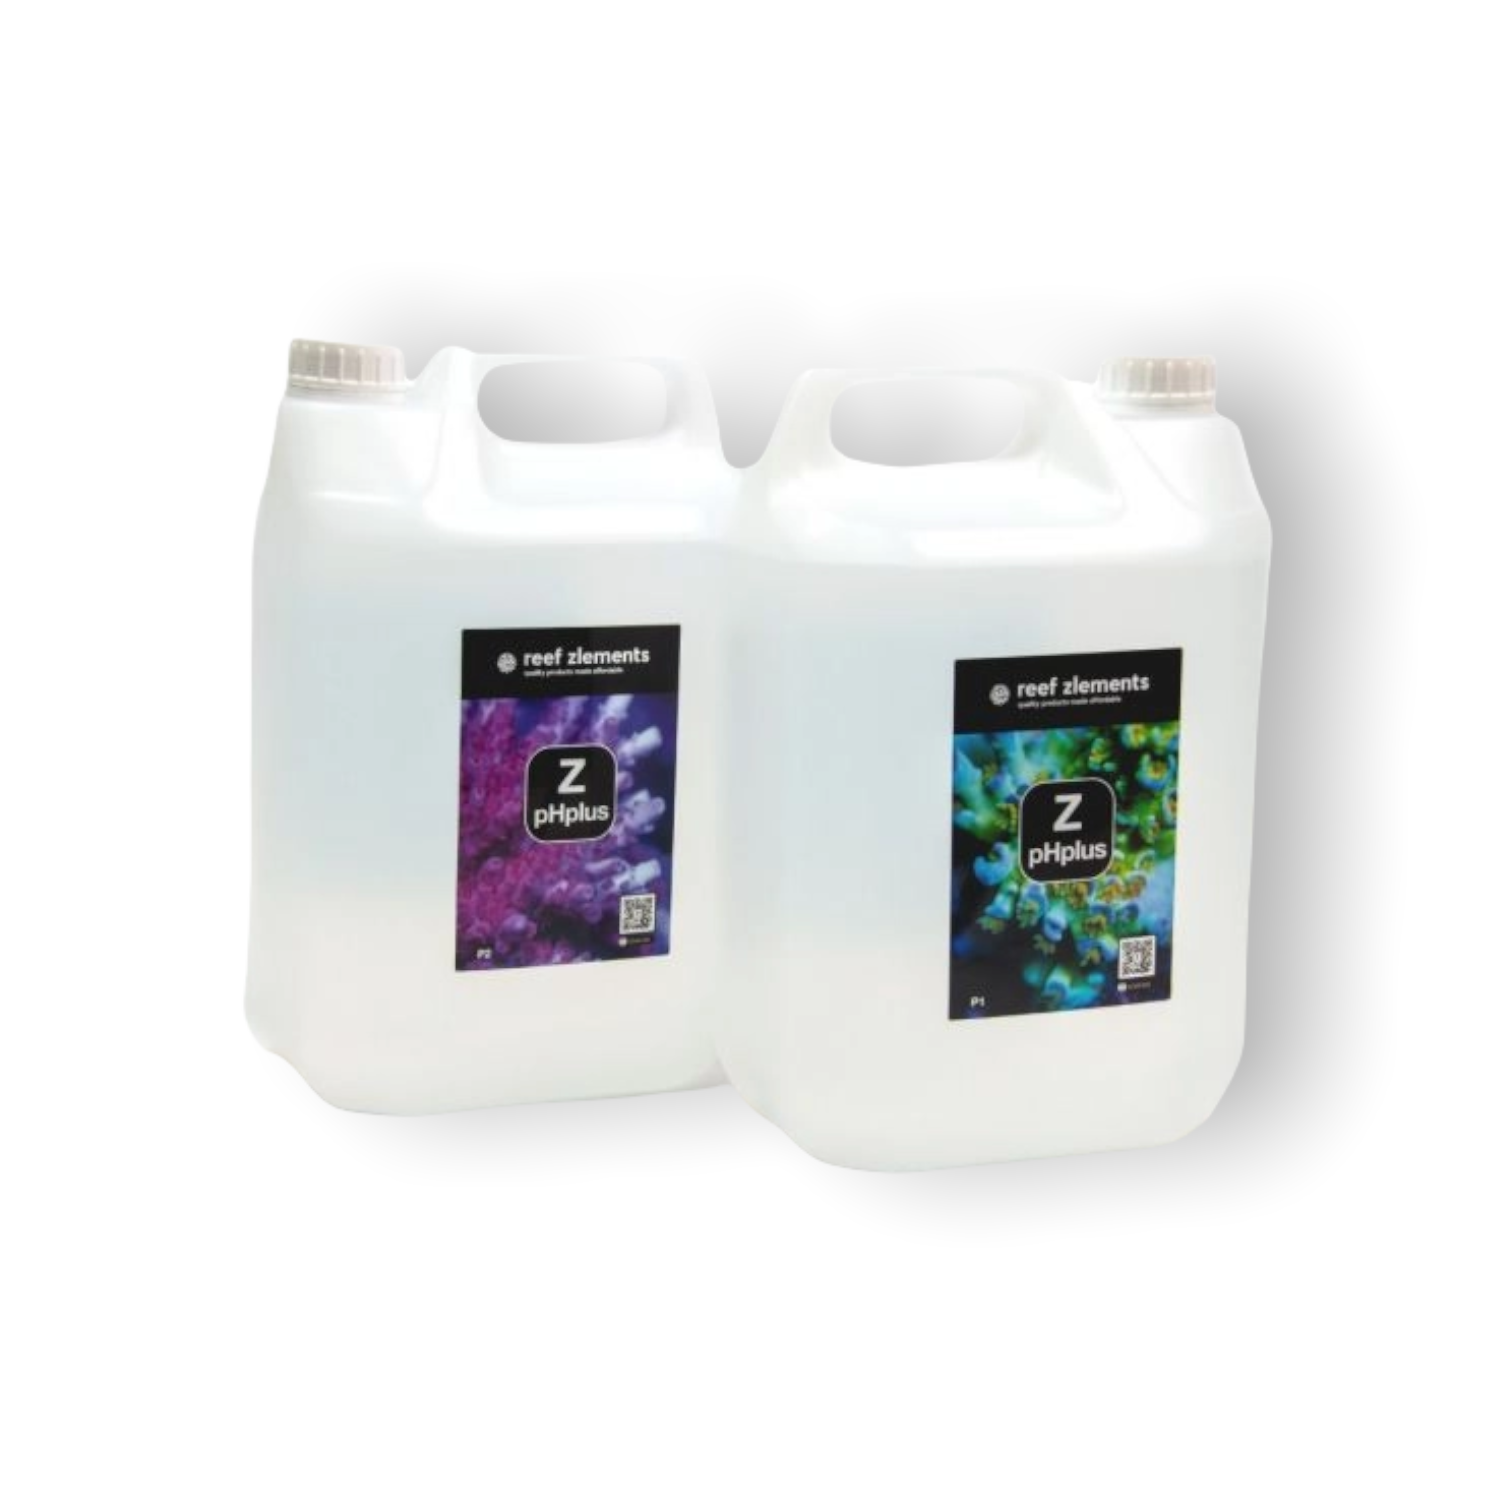 Reef Zlements Z-pHplus 5 Litre (Collection Only)